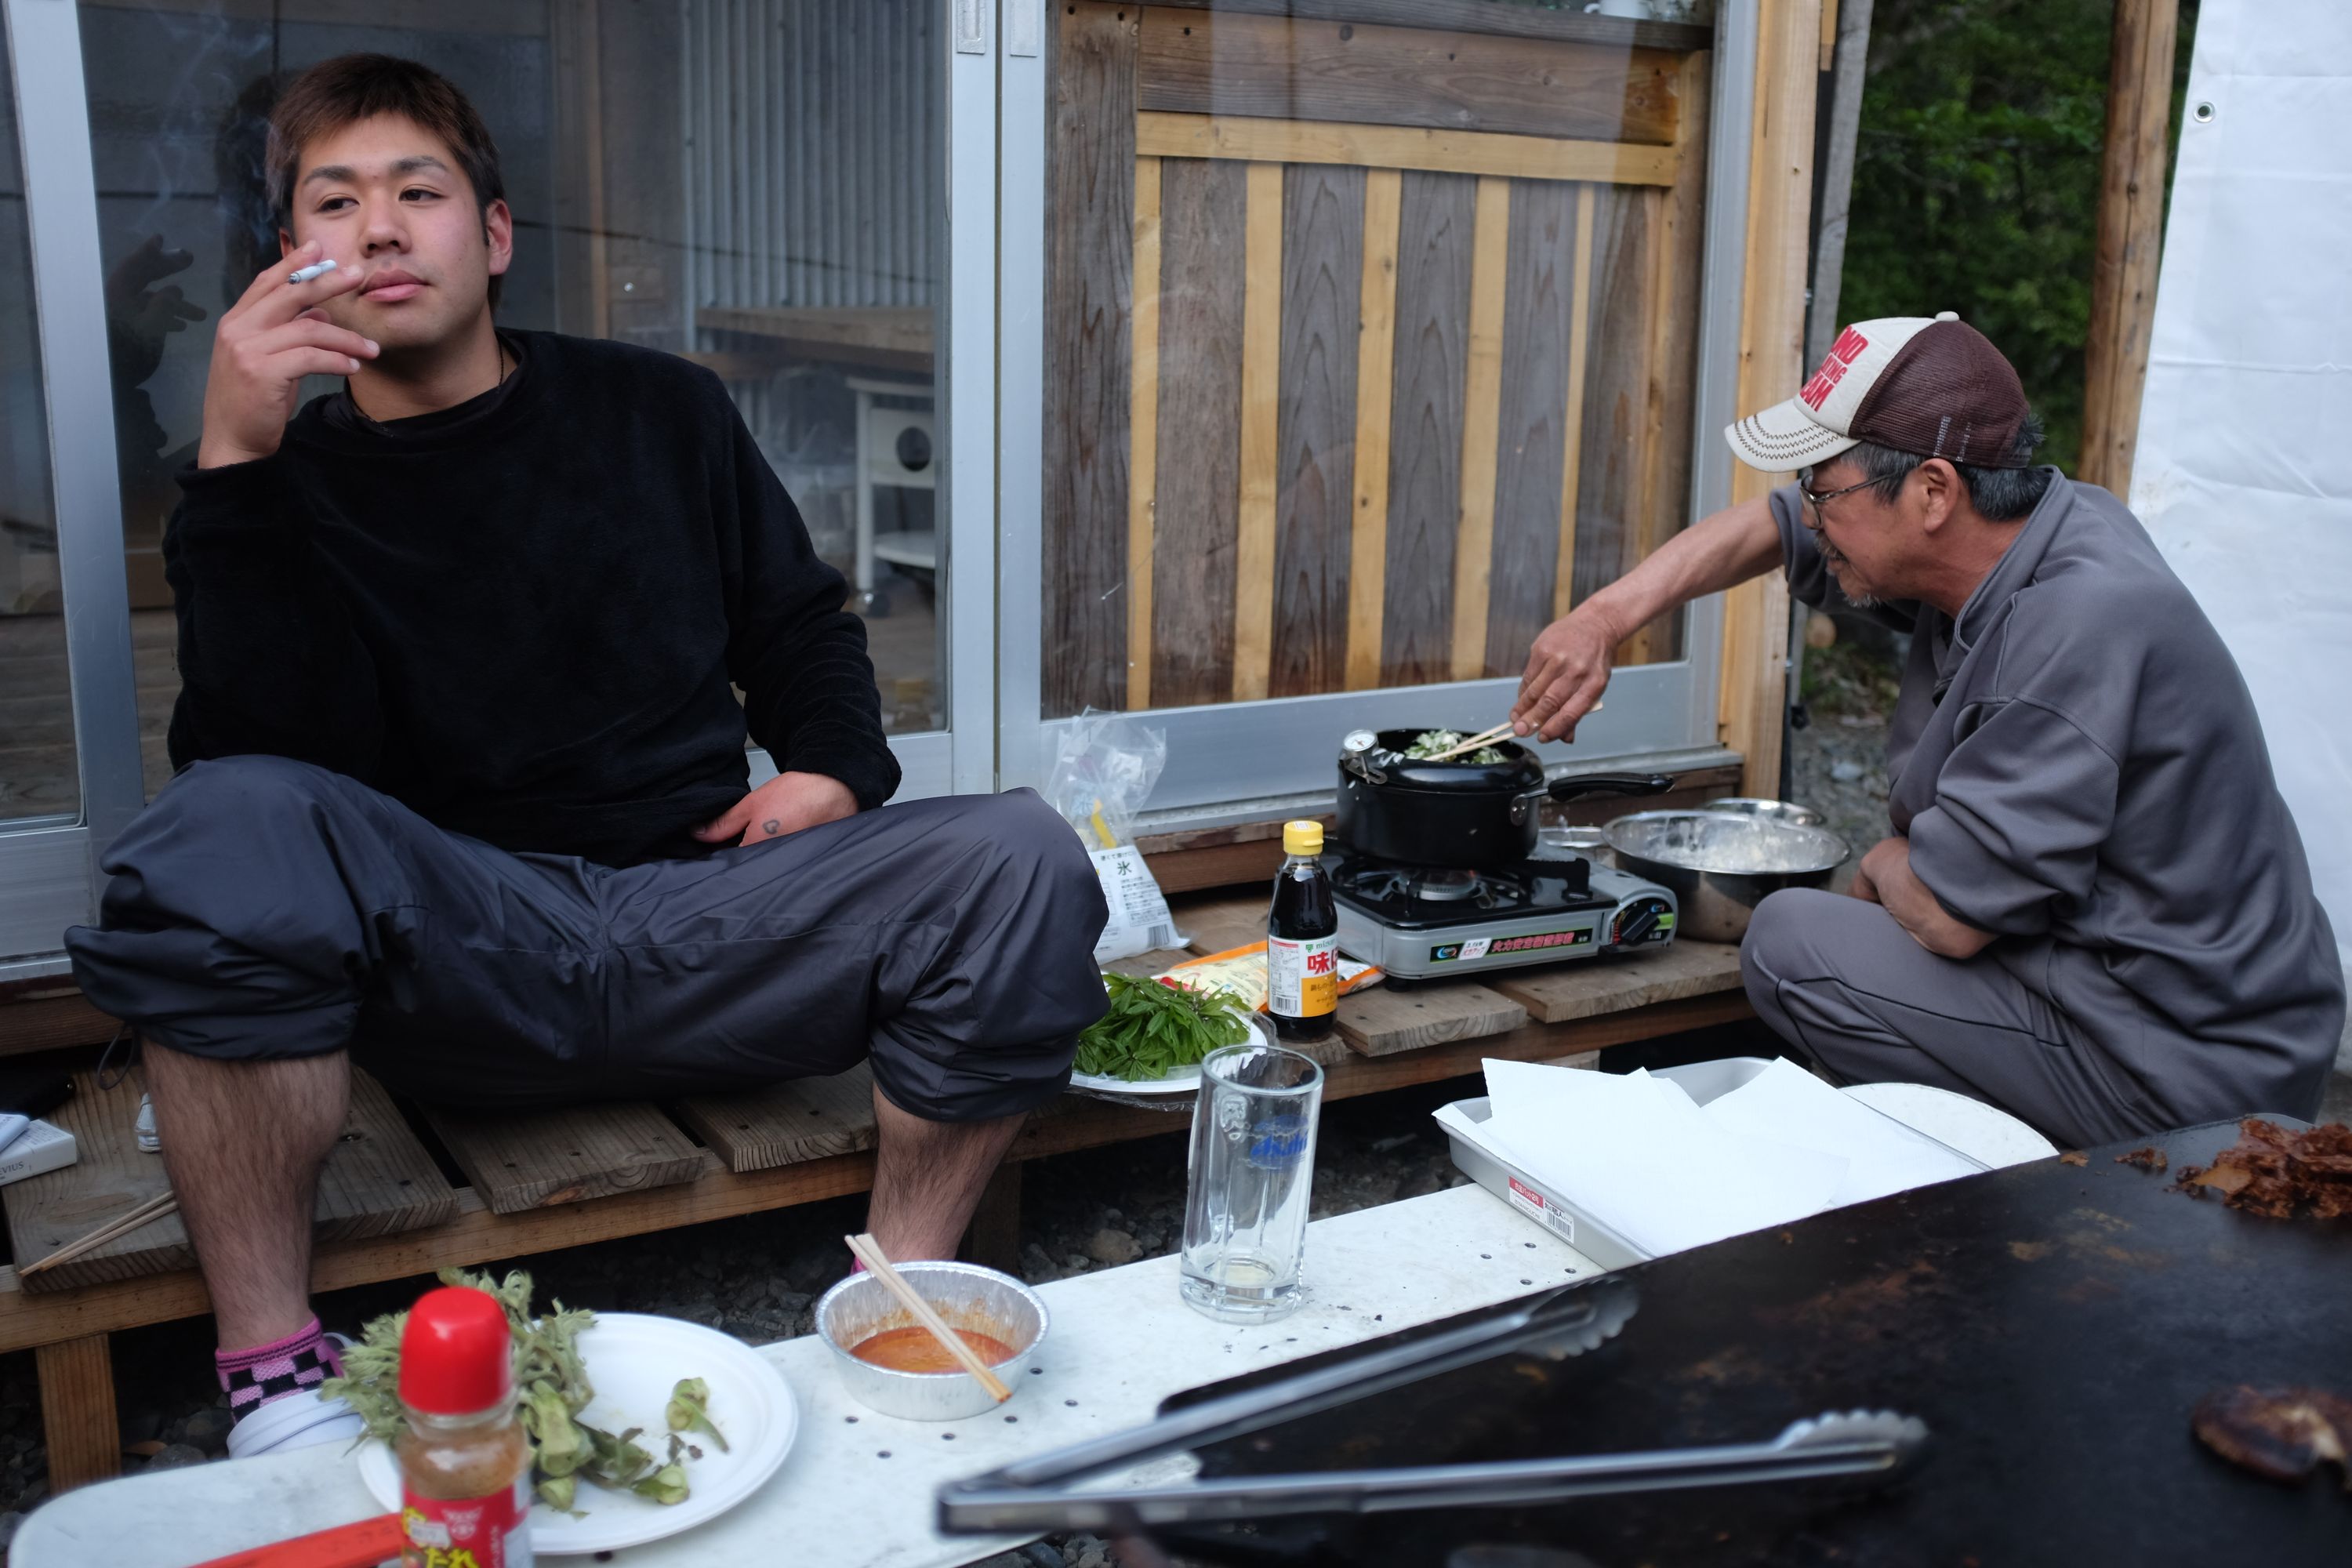 Two men by a cabin, one of them relaxing with a cigarette, the other frying vegetables on a gas burner.